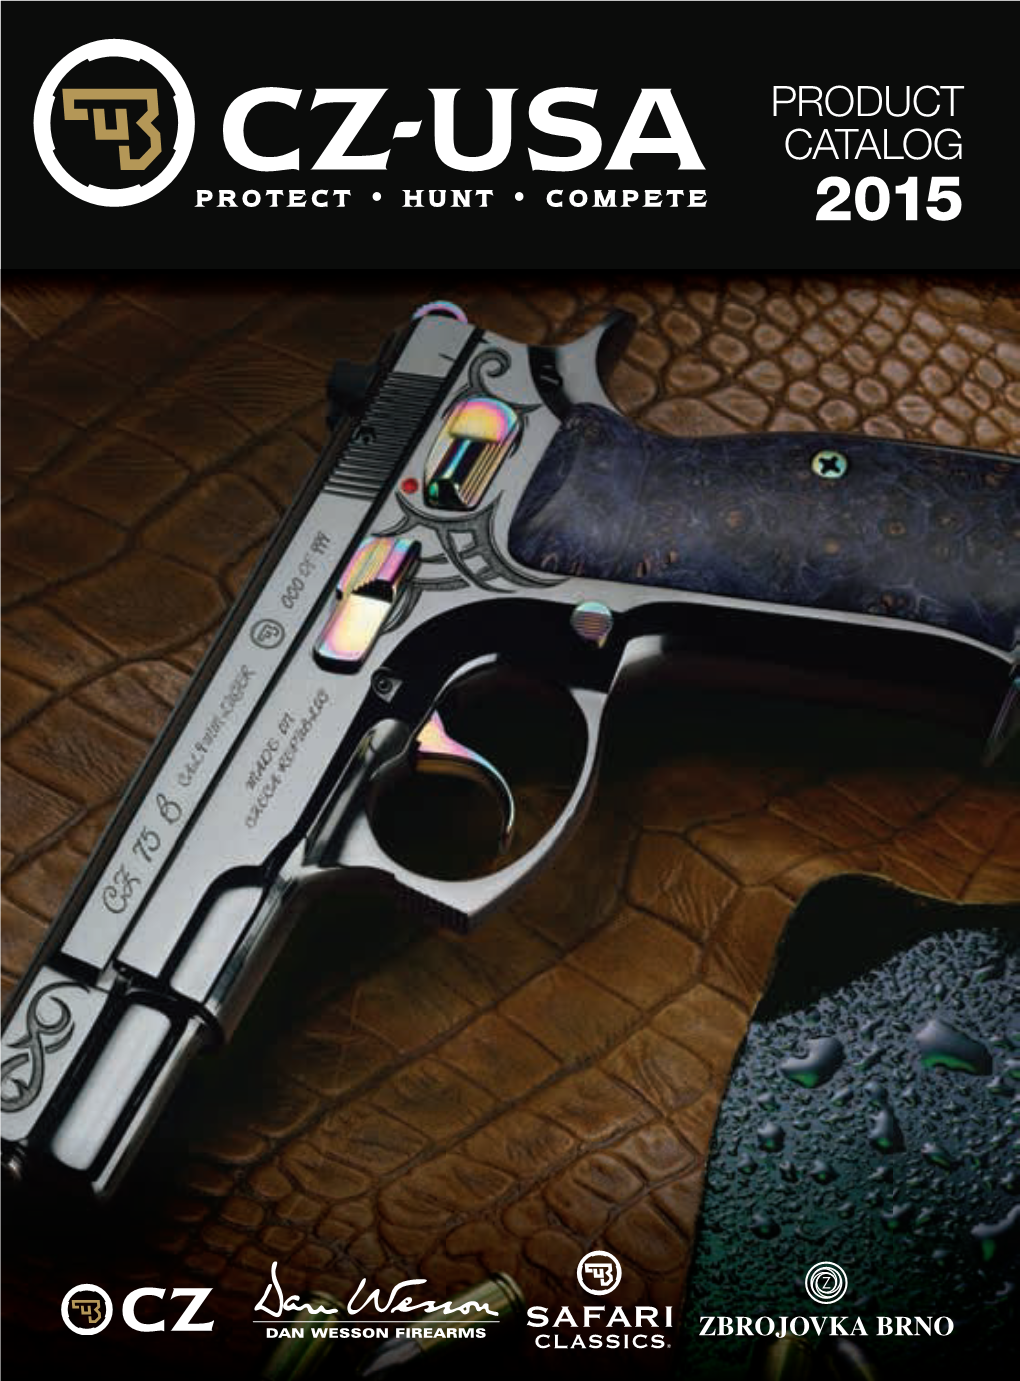 PRODUCT CATALOG 2015 2015 Is a Year of Anniversaries for Us Here at CZ-USA